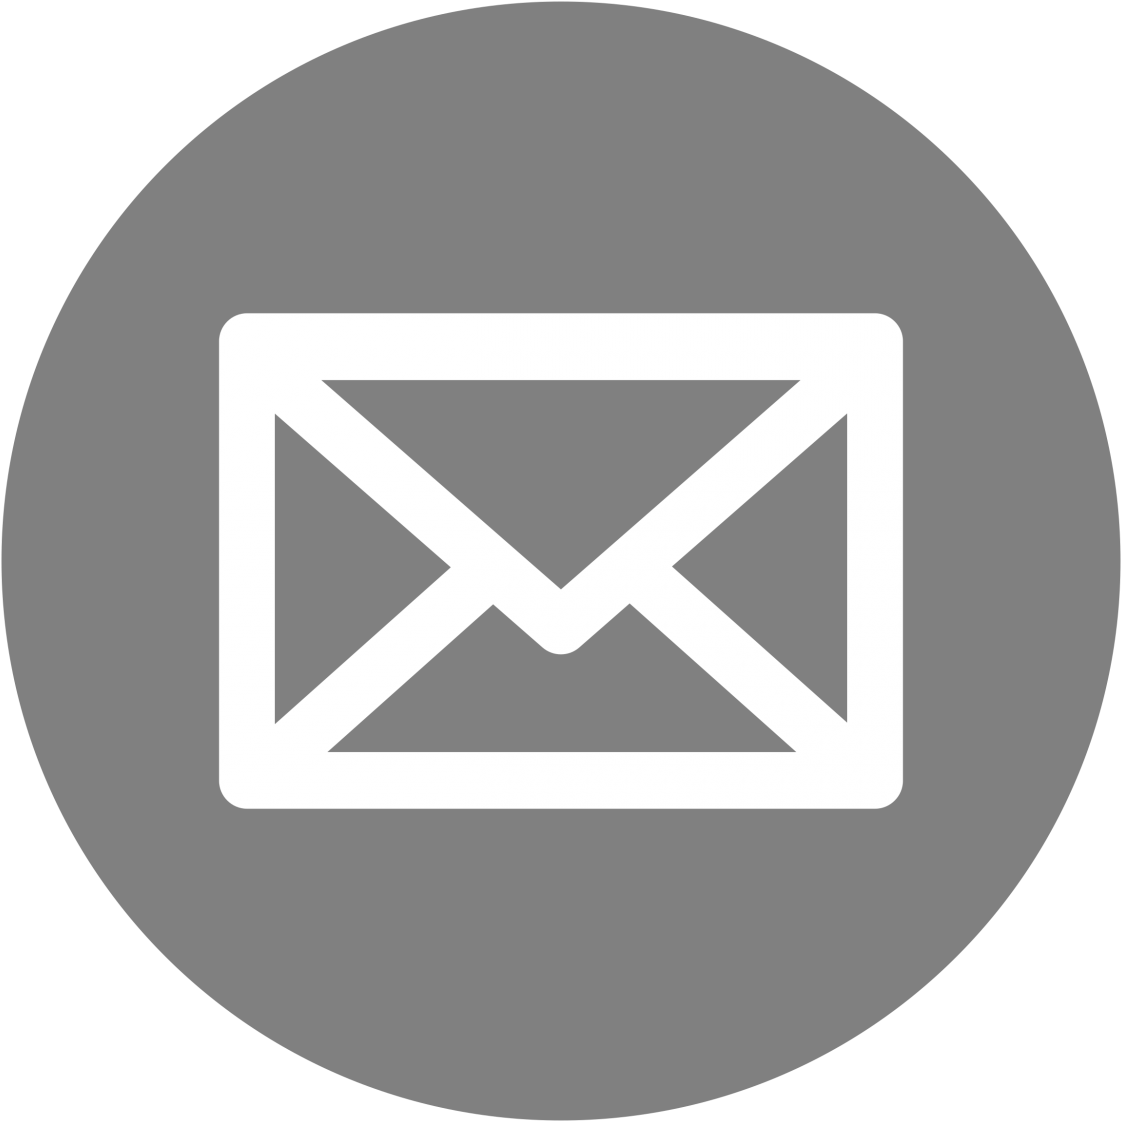 Mail Icon White On Grey - Transparent Background Email Logos (1170x1170)